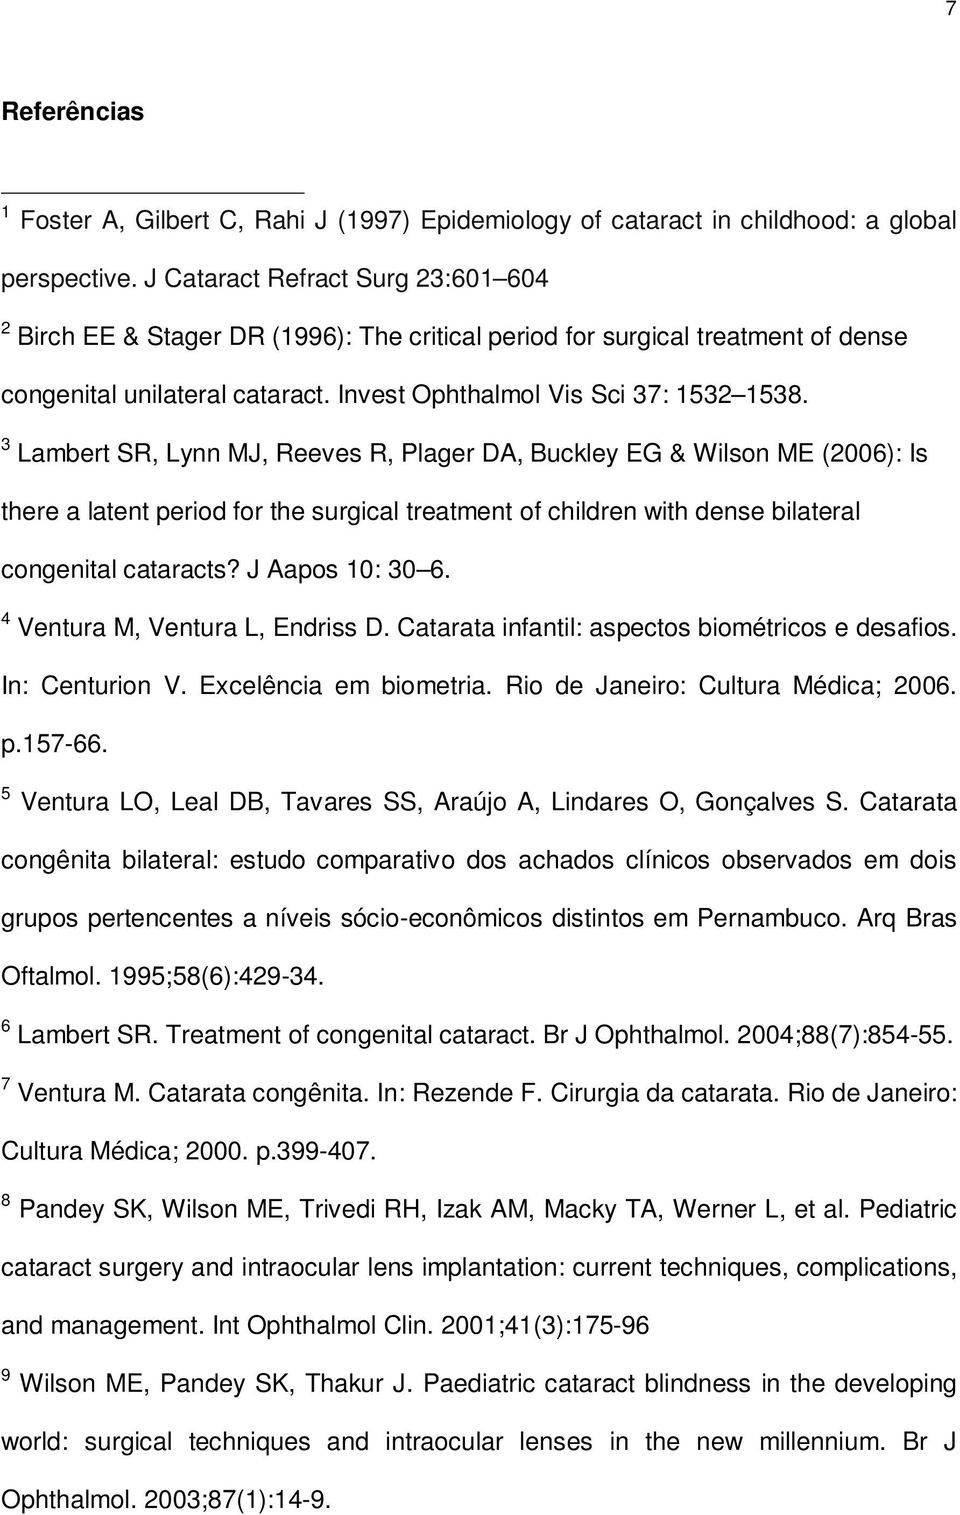 3 Lambert SR, Lynn MJ, Reeves R, Plager DA, Buckley EG & Wilson ME (2006): Is there a latent period for the surgical treatment of children with dense bilateral congenital cataracts? J Aapos 10: 30 6.